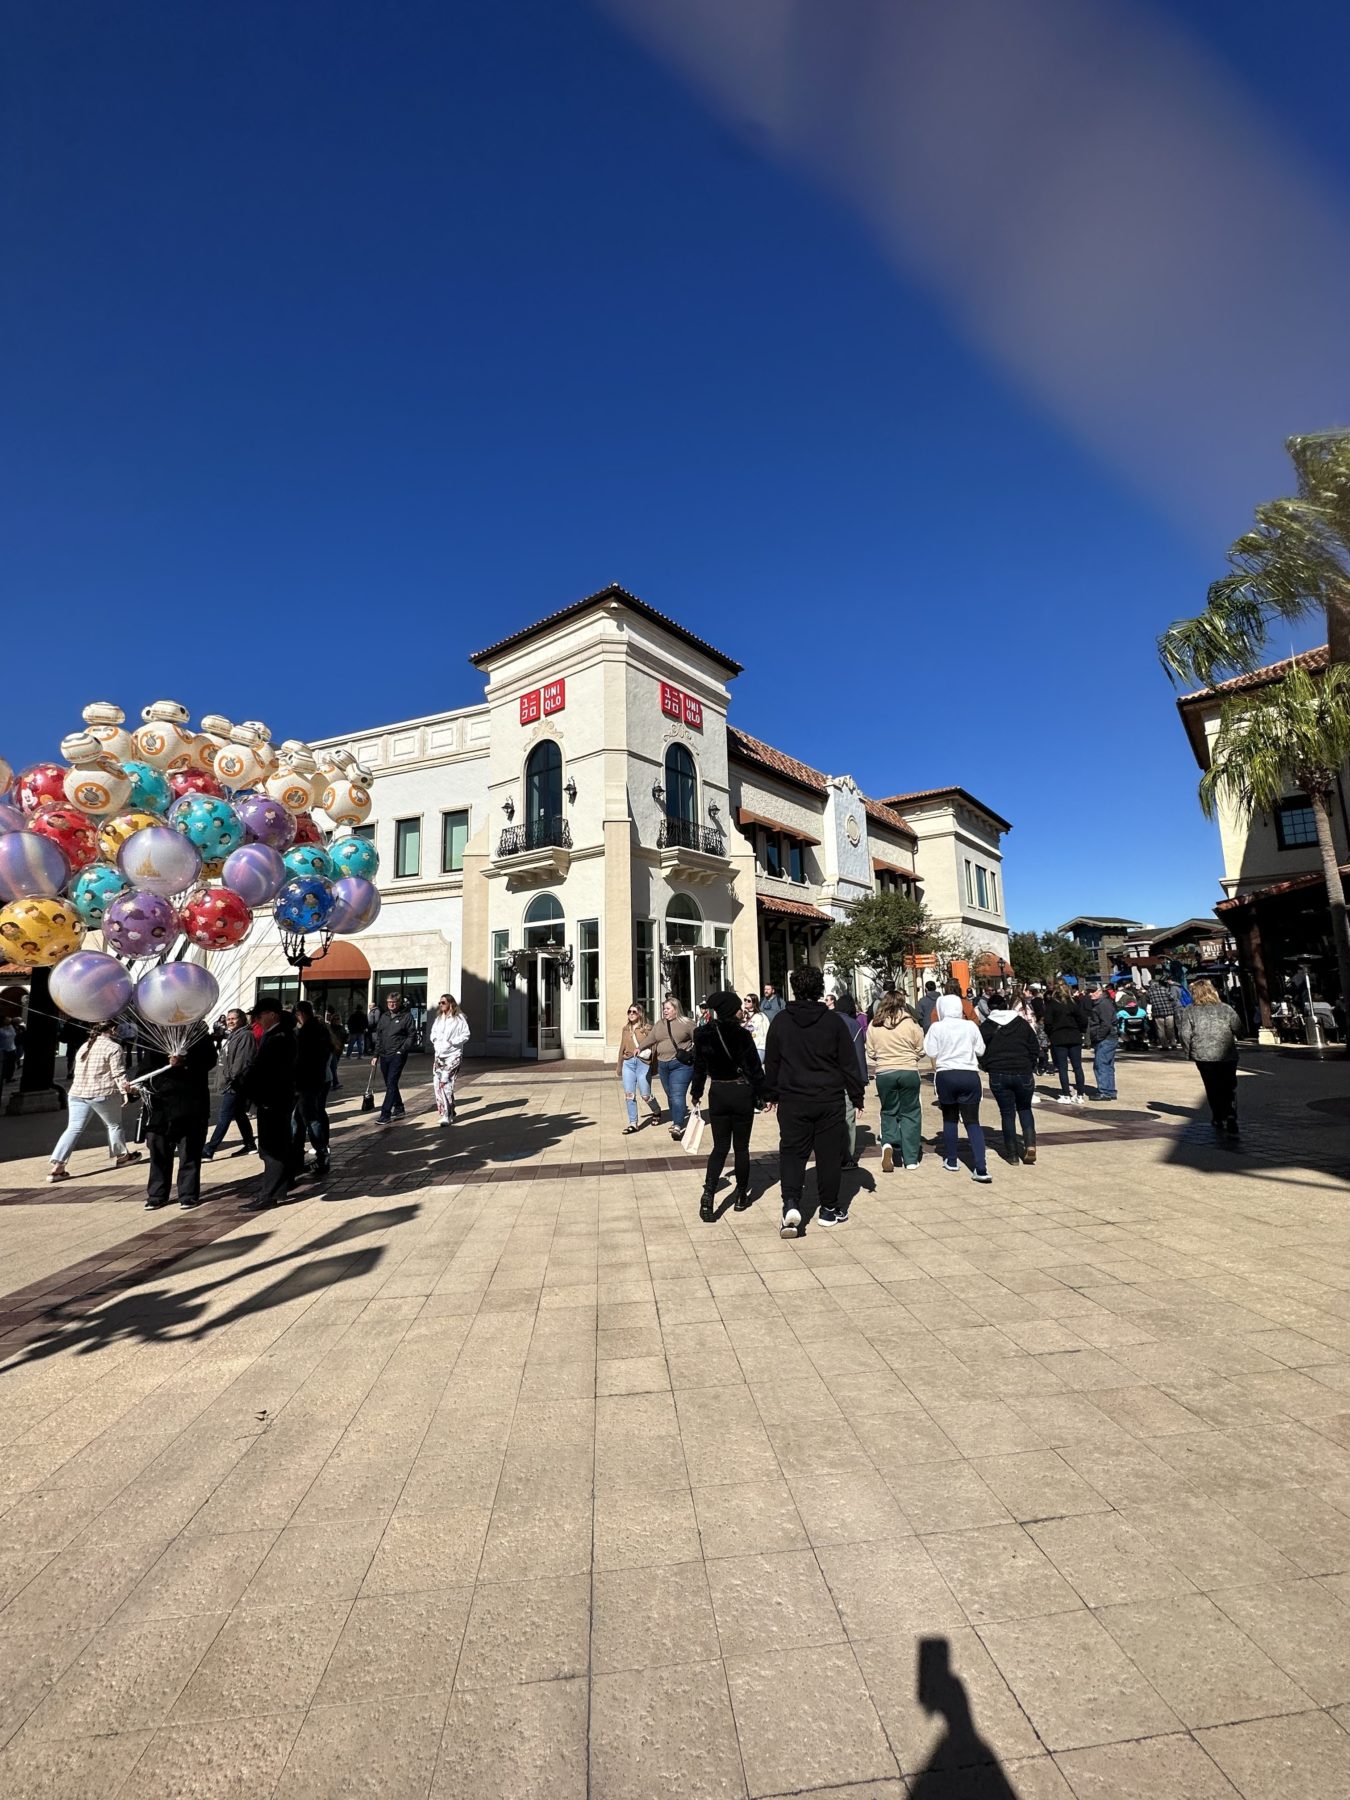 Things to do at Disney Springs